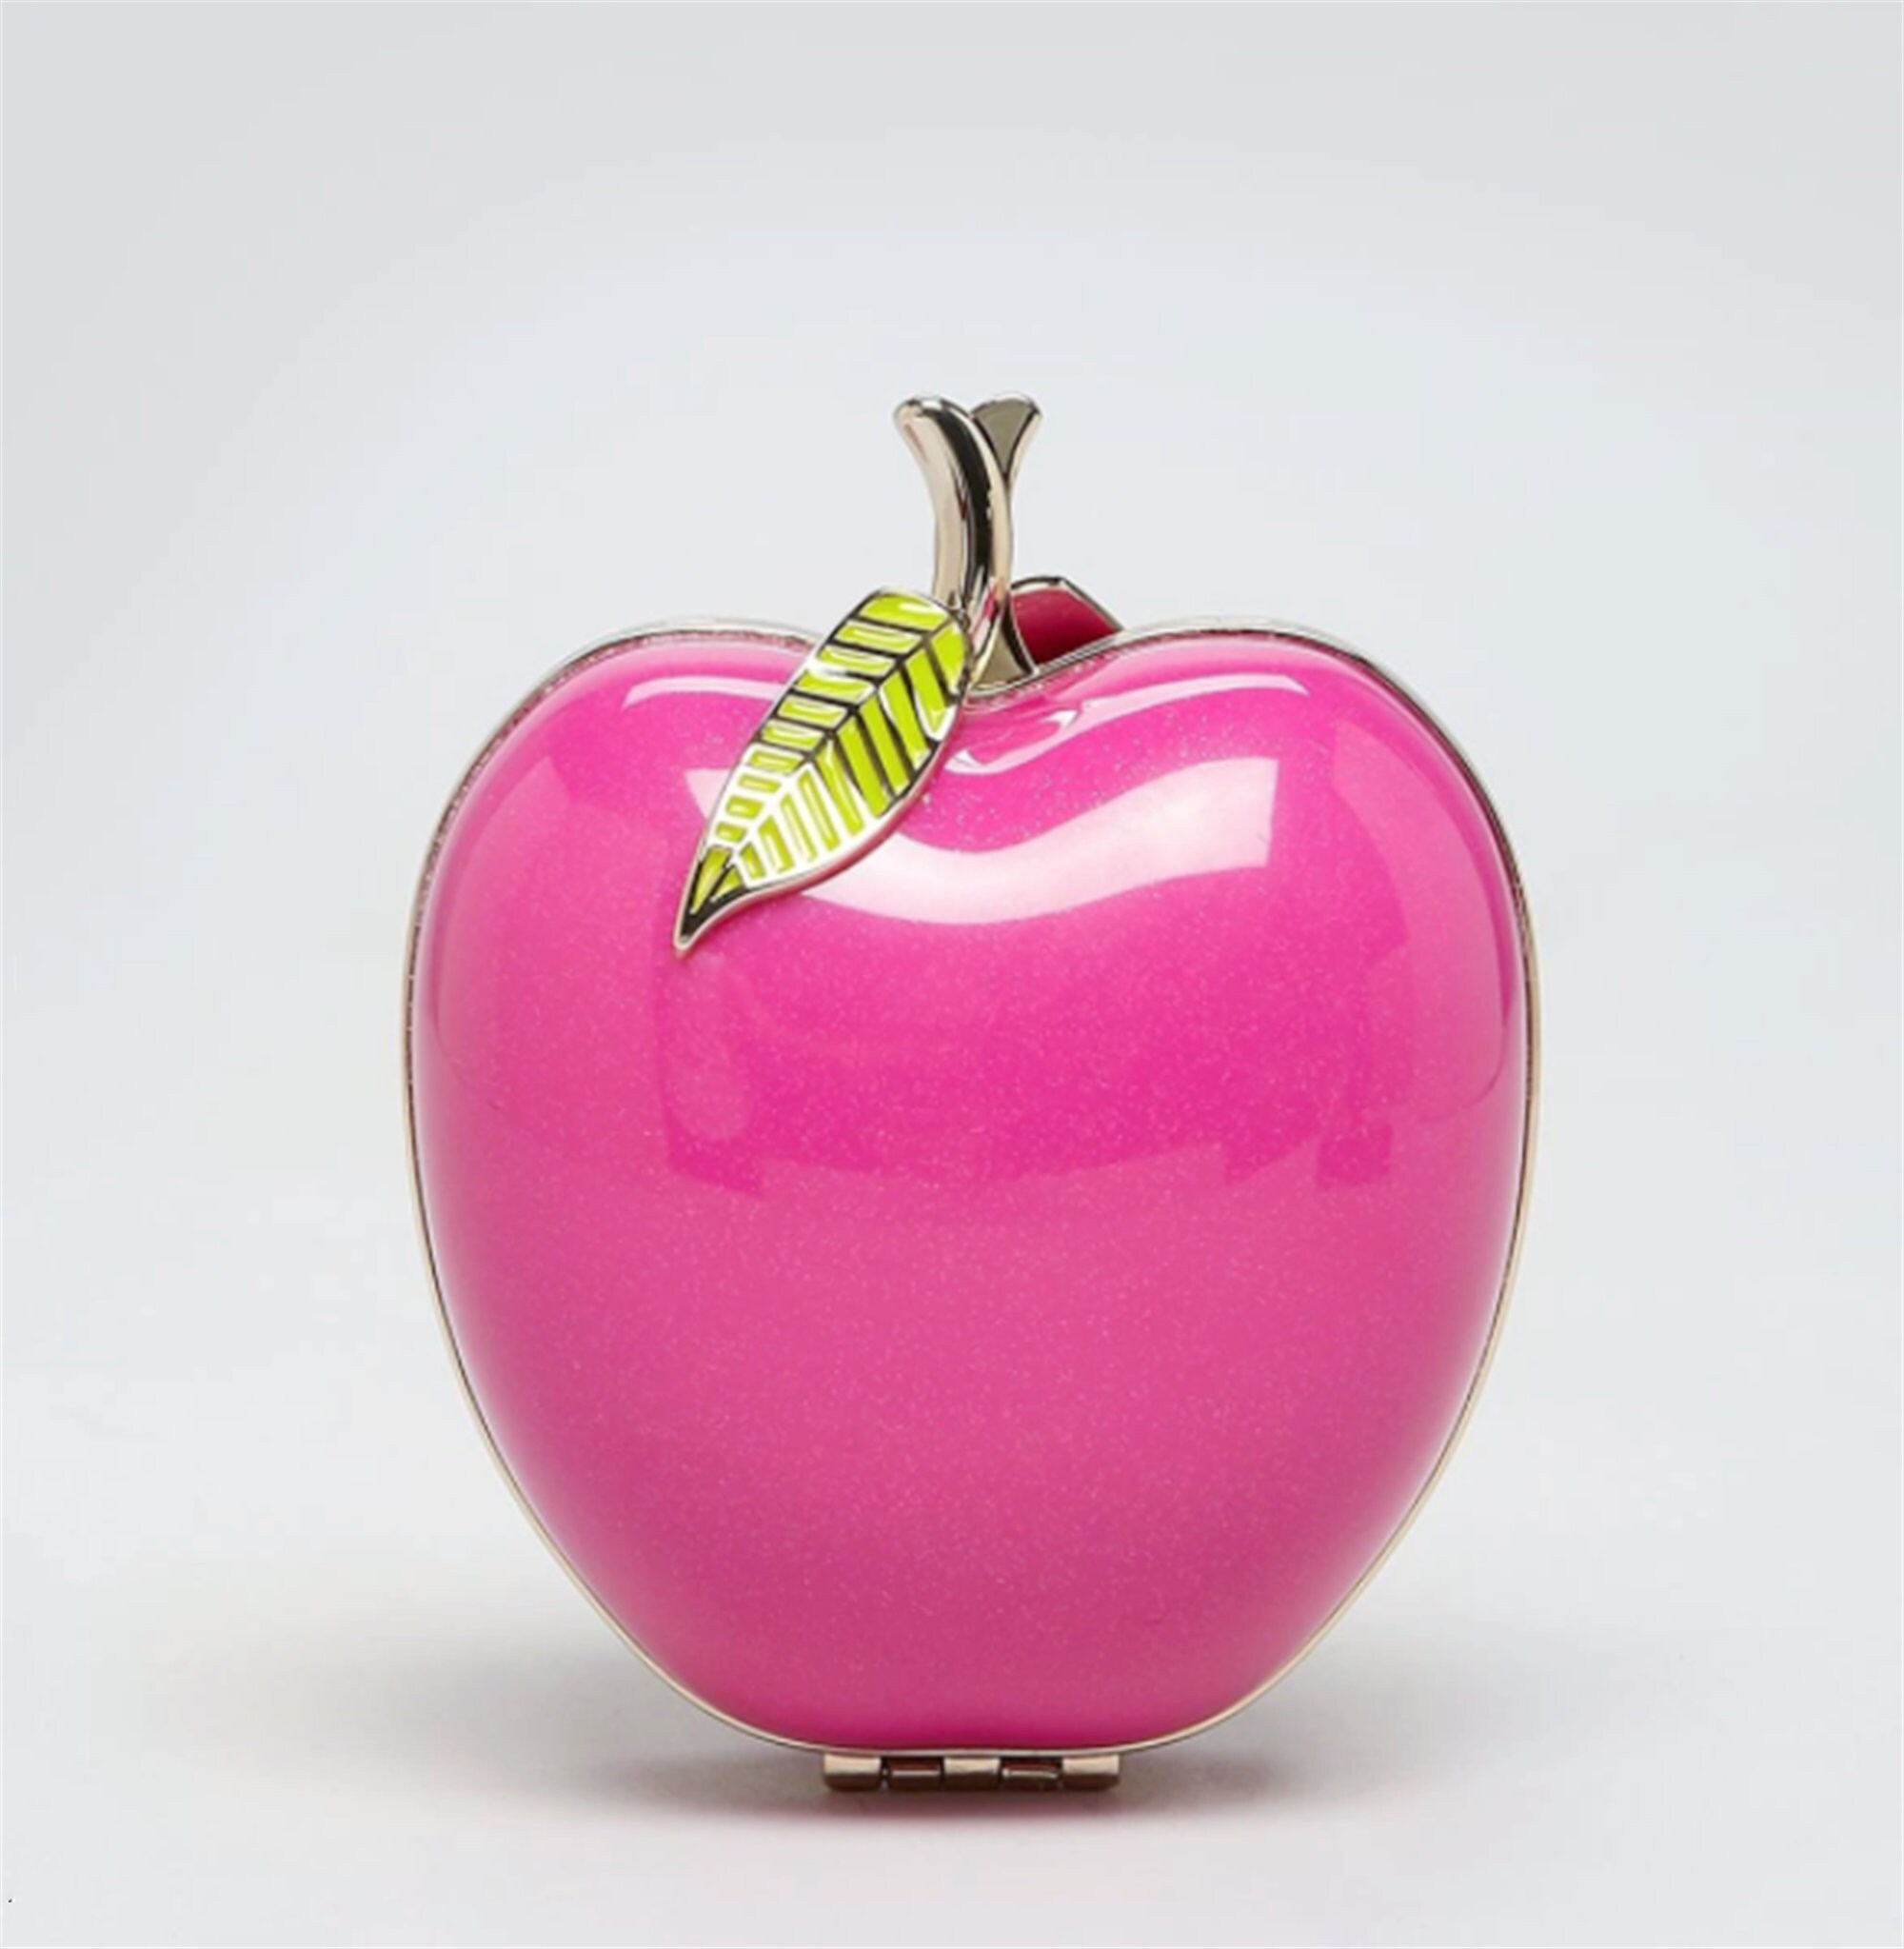 Kate Spade Far From the Tree Resin Apple Clutch/ Bag in Purple - Etsy